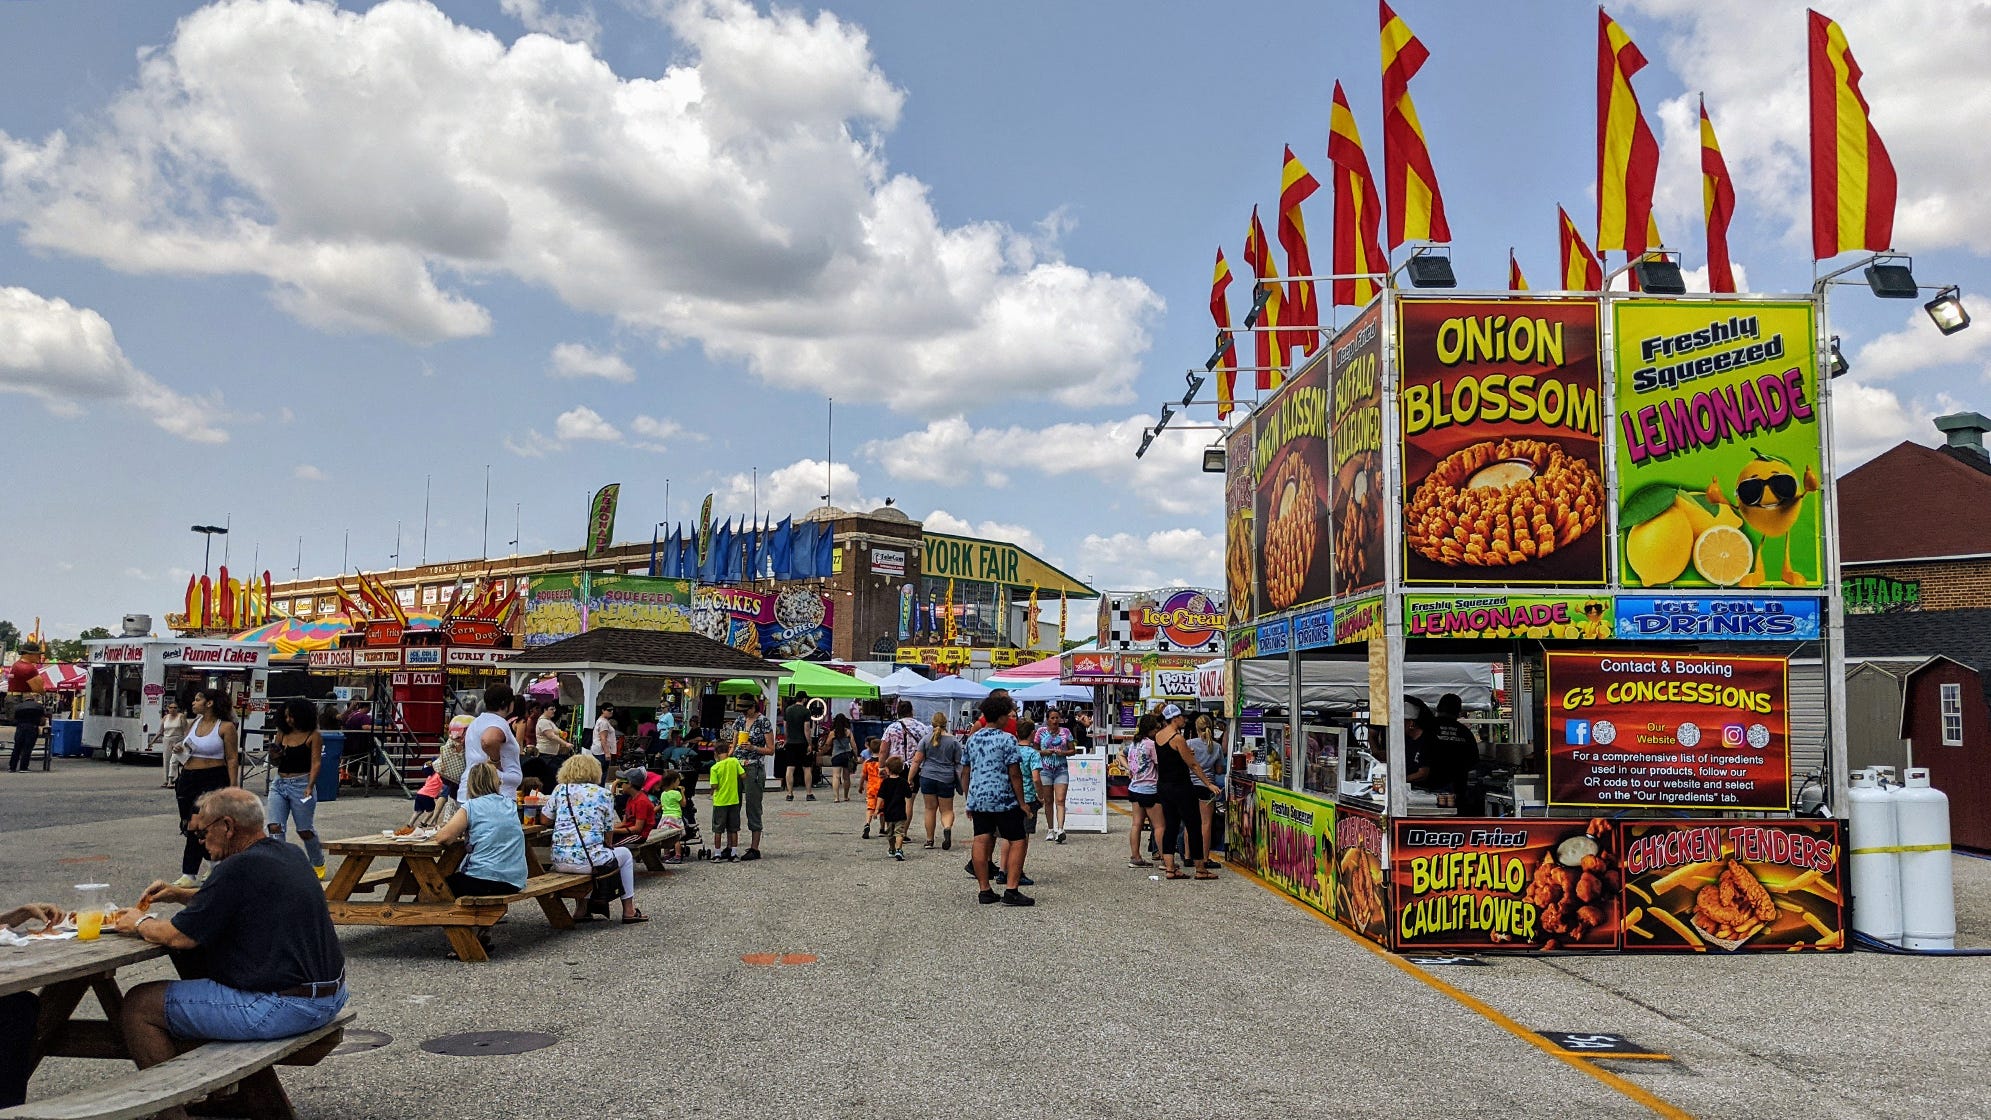 York State Fair Attendance increased over 2019 event